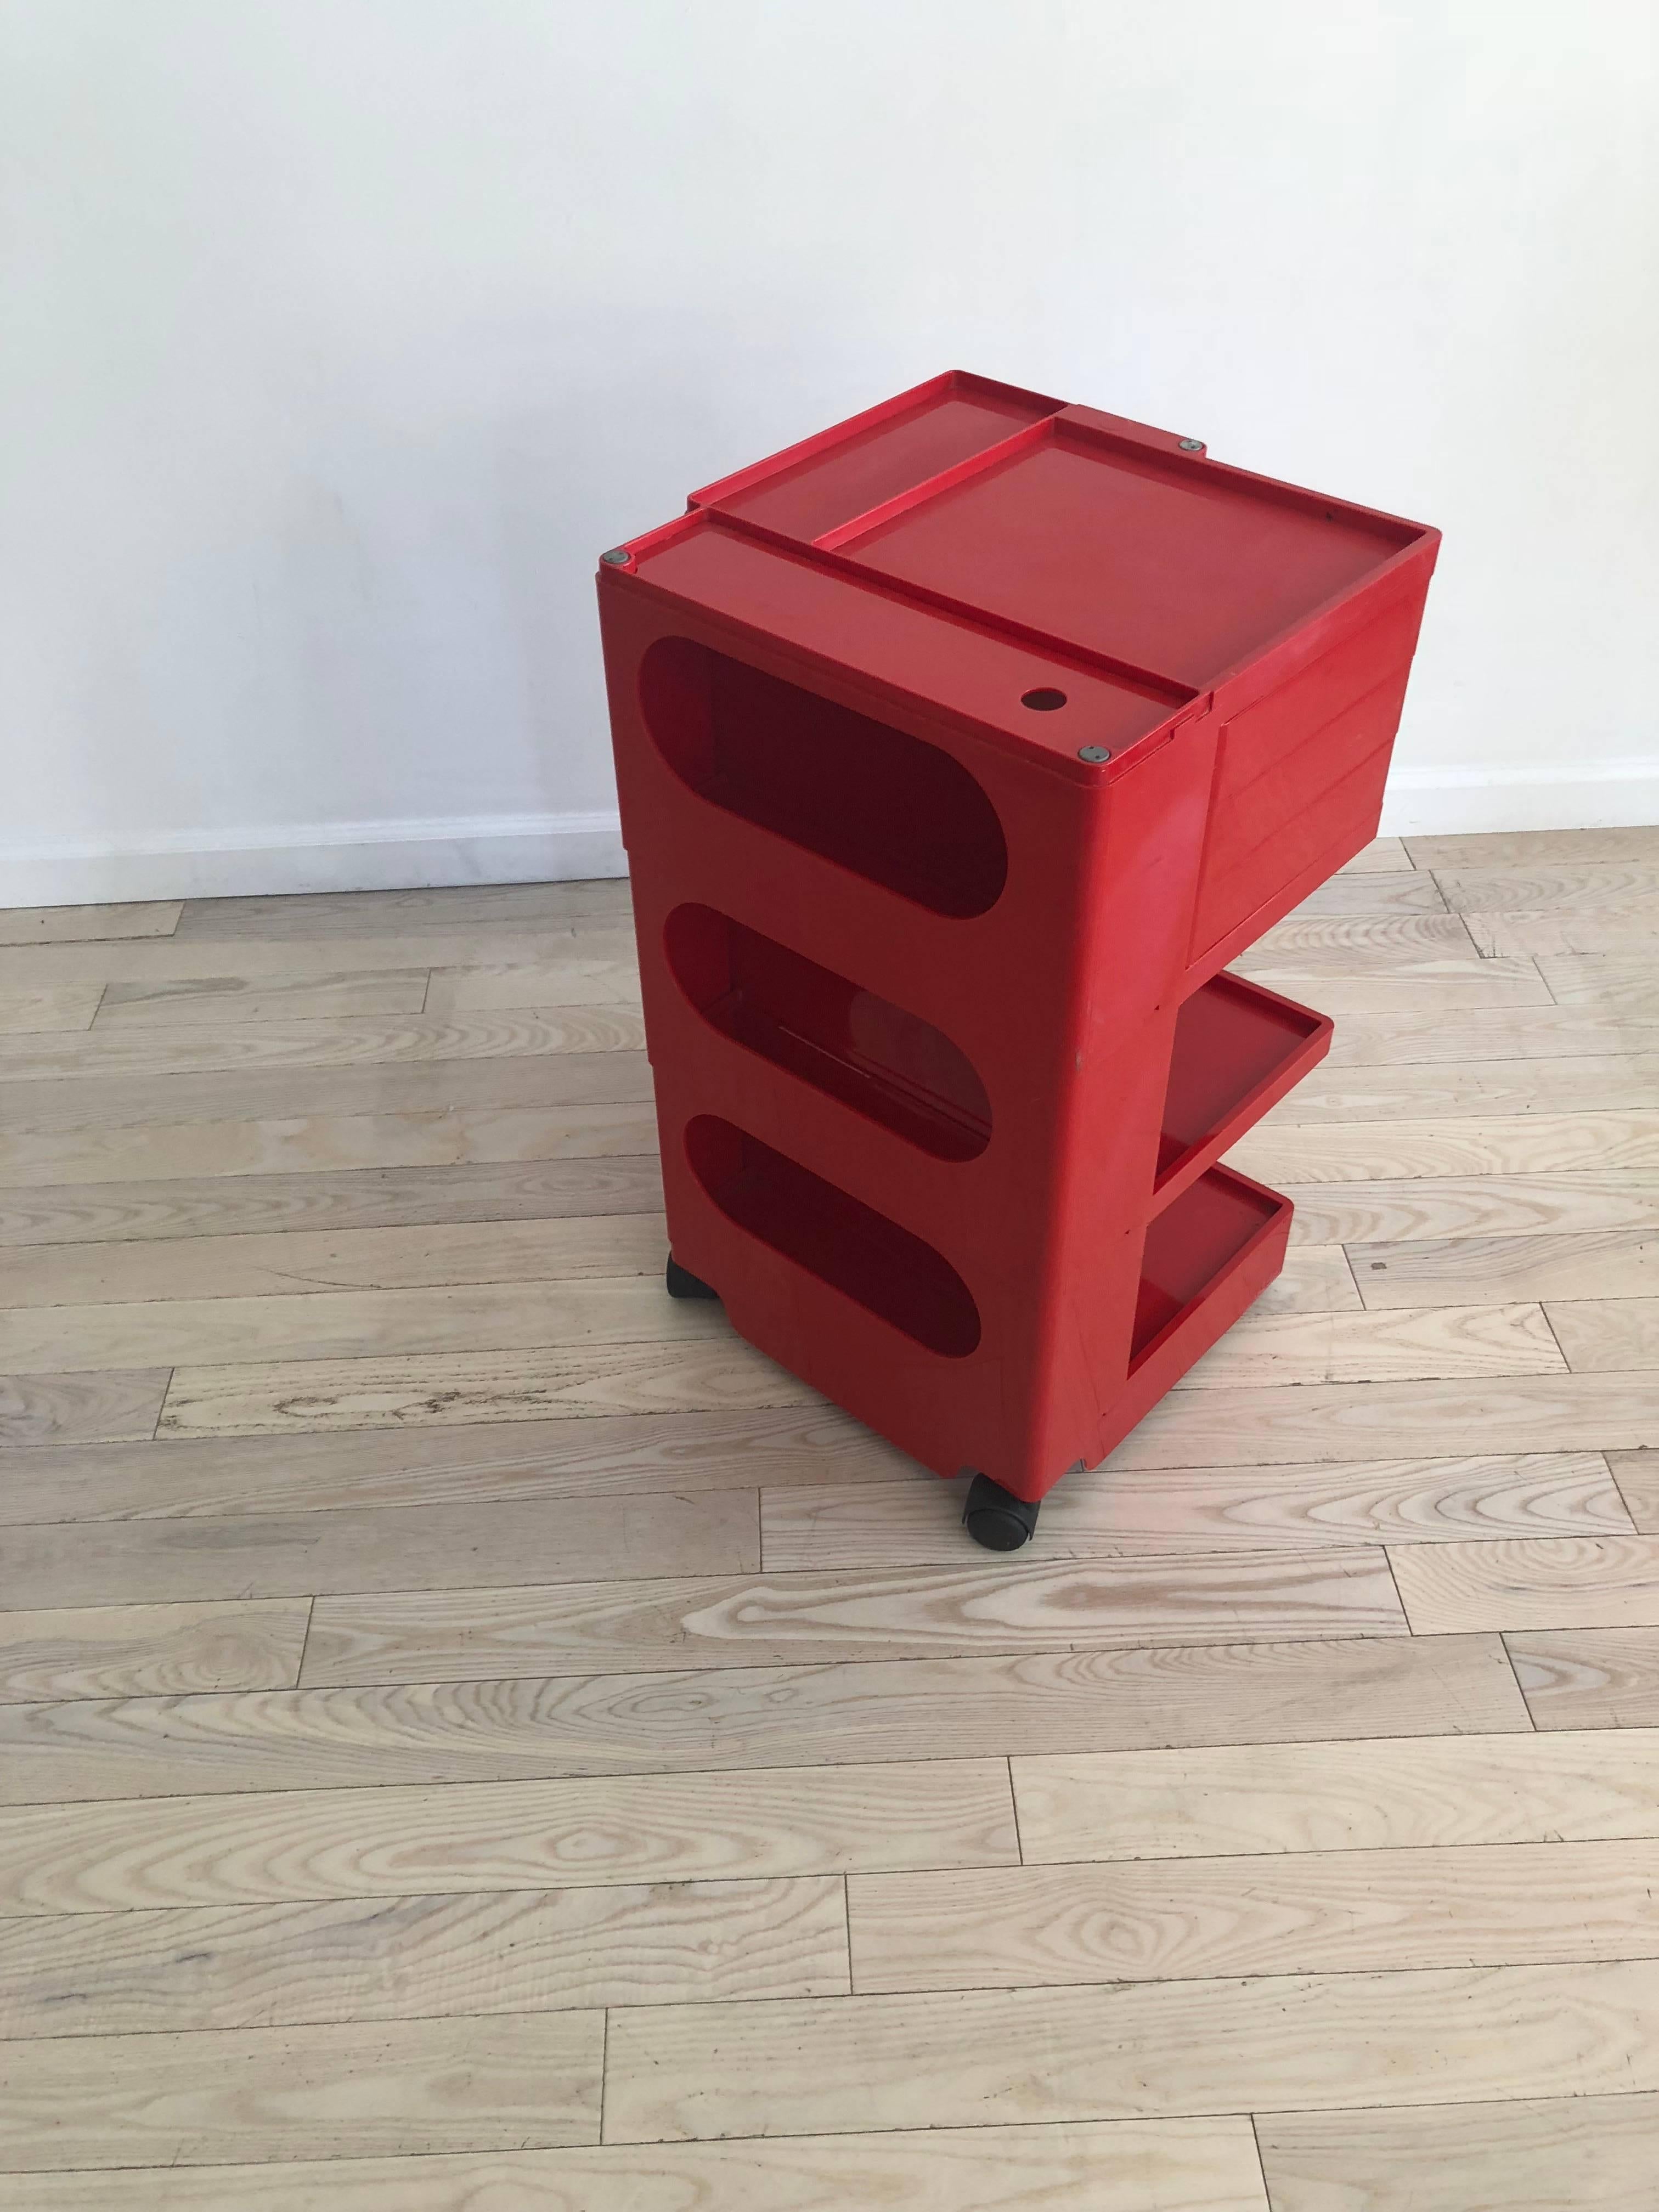 Late 20th Century 1970s Red Plastic Boby Cart Work Station by Joe Colombo